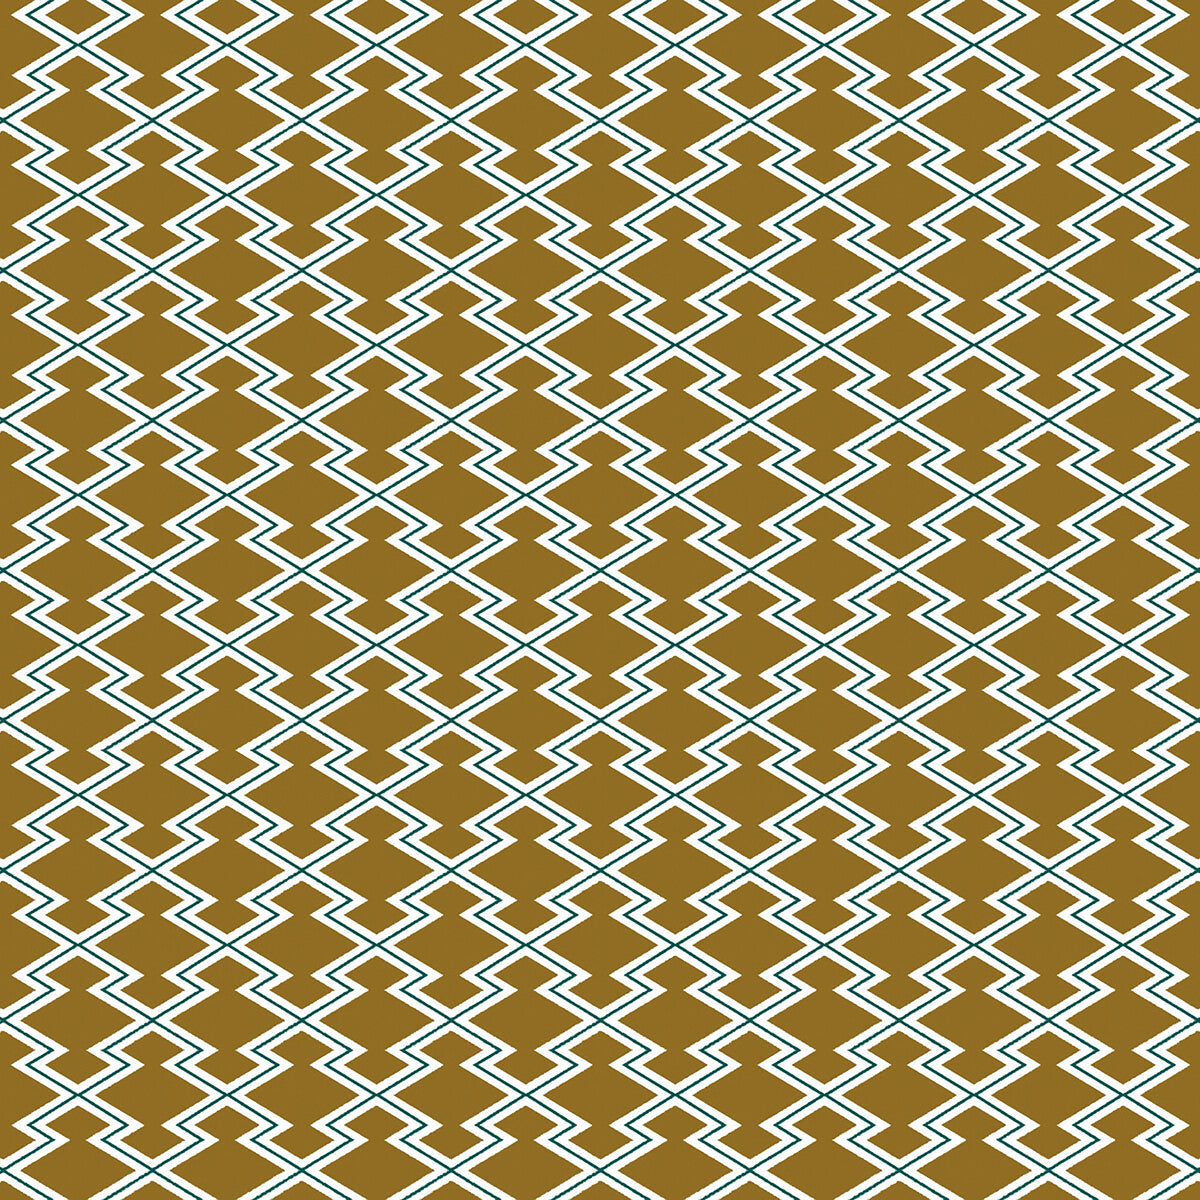 Hayami fabric in ocre color - pattern GDT5625.004.0 - by Gaston y Daniela in the Gaston Japon collection